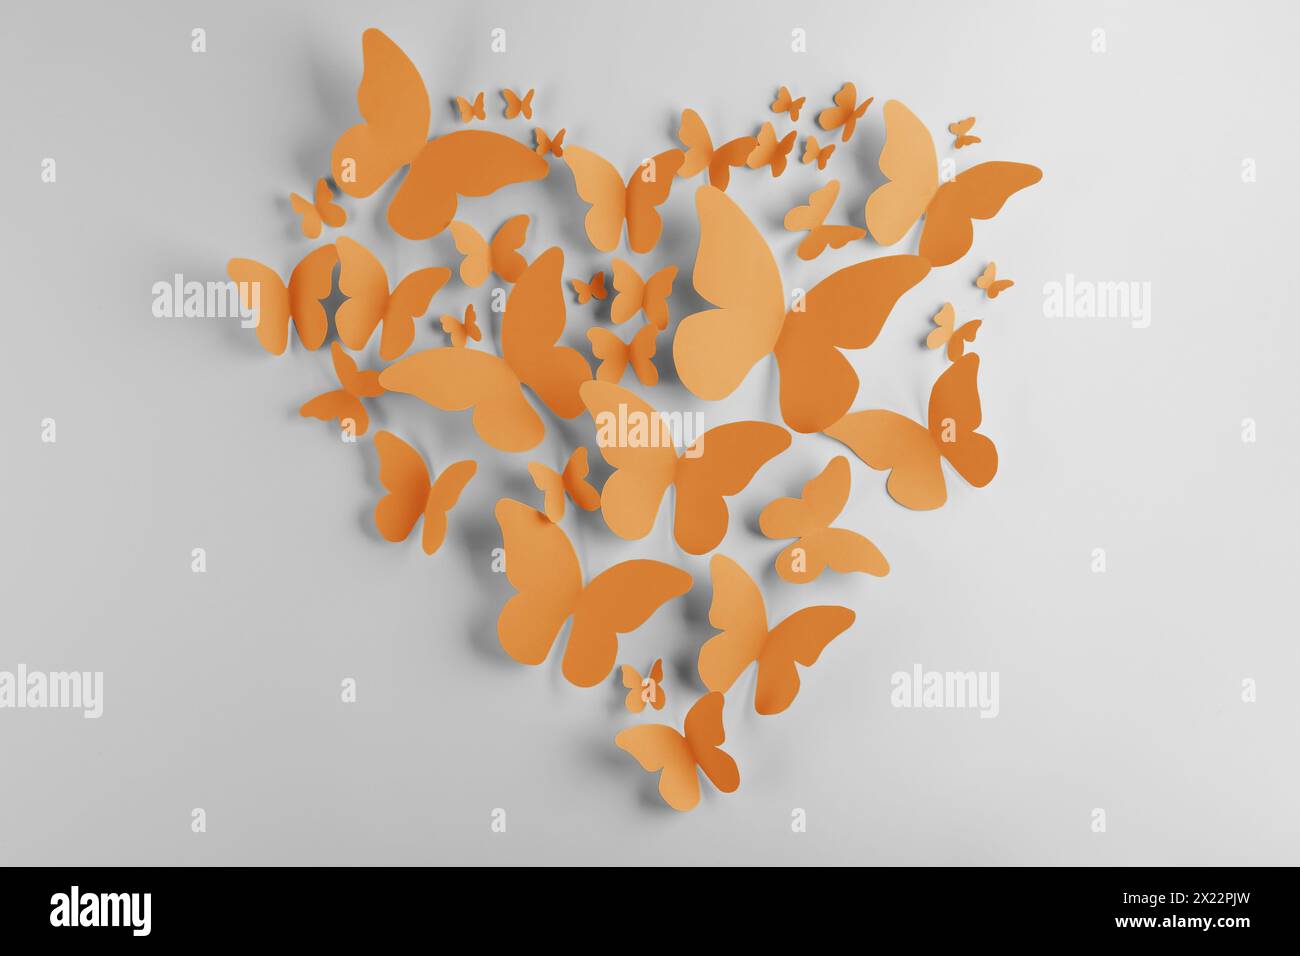 Heart made of orange paper butterflies on white wall Stock Photo